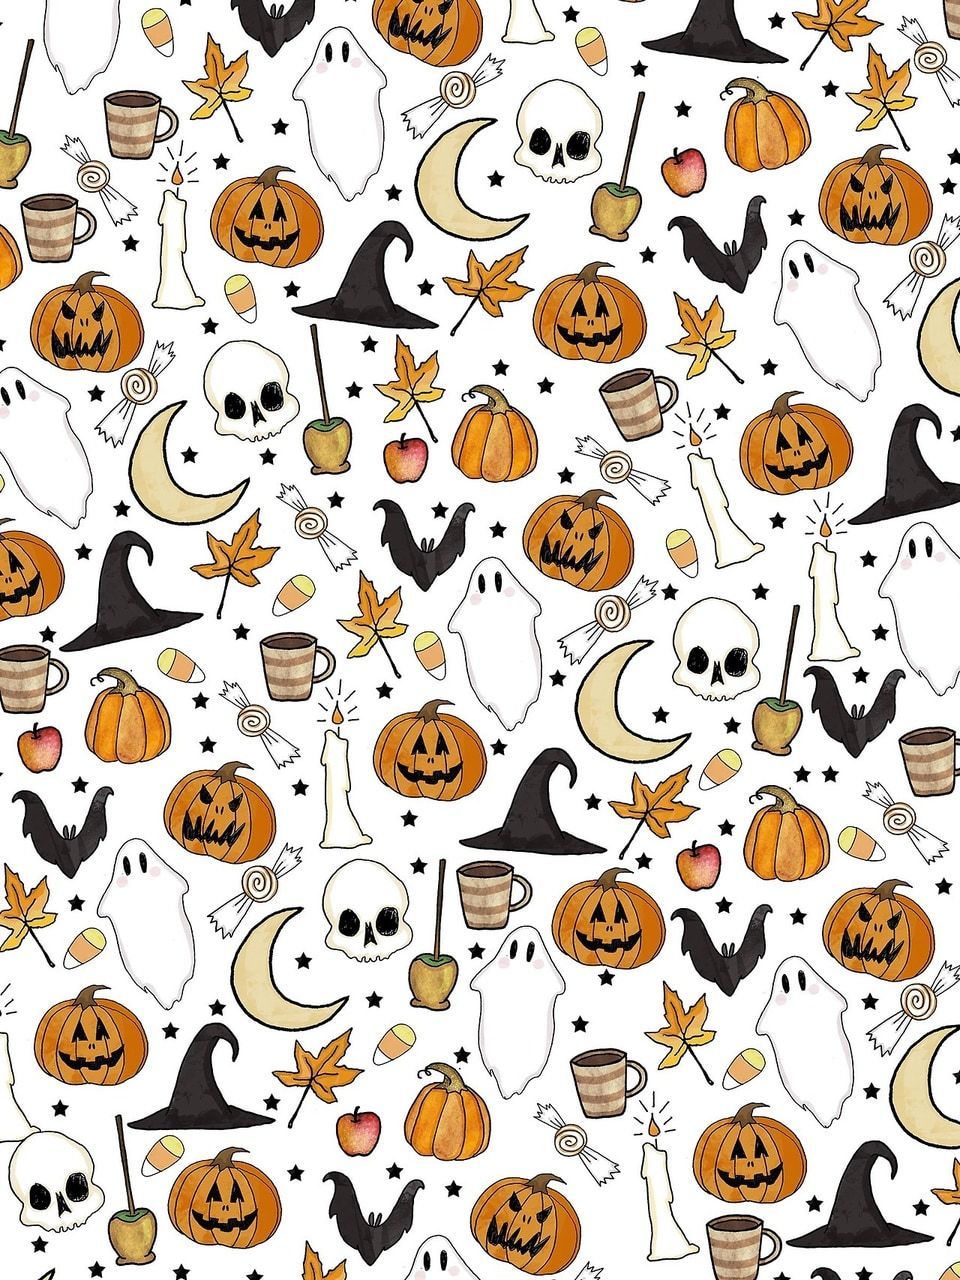 A pattern of Halloween themed items such as pumpkins, ghosts, and witch hats. - Cute fall, Halloween, cute Halloween